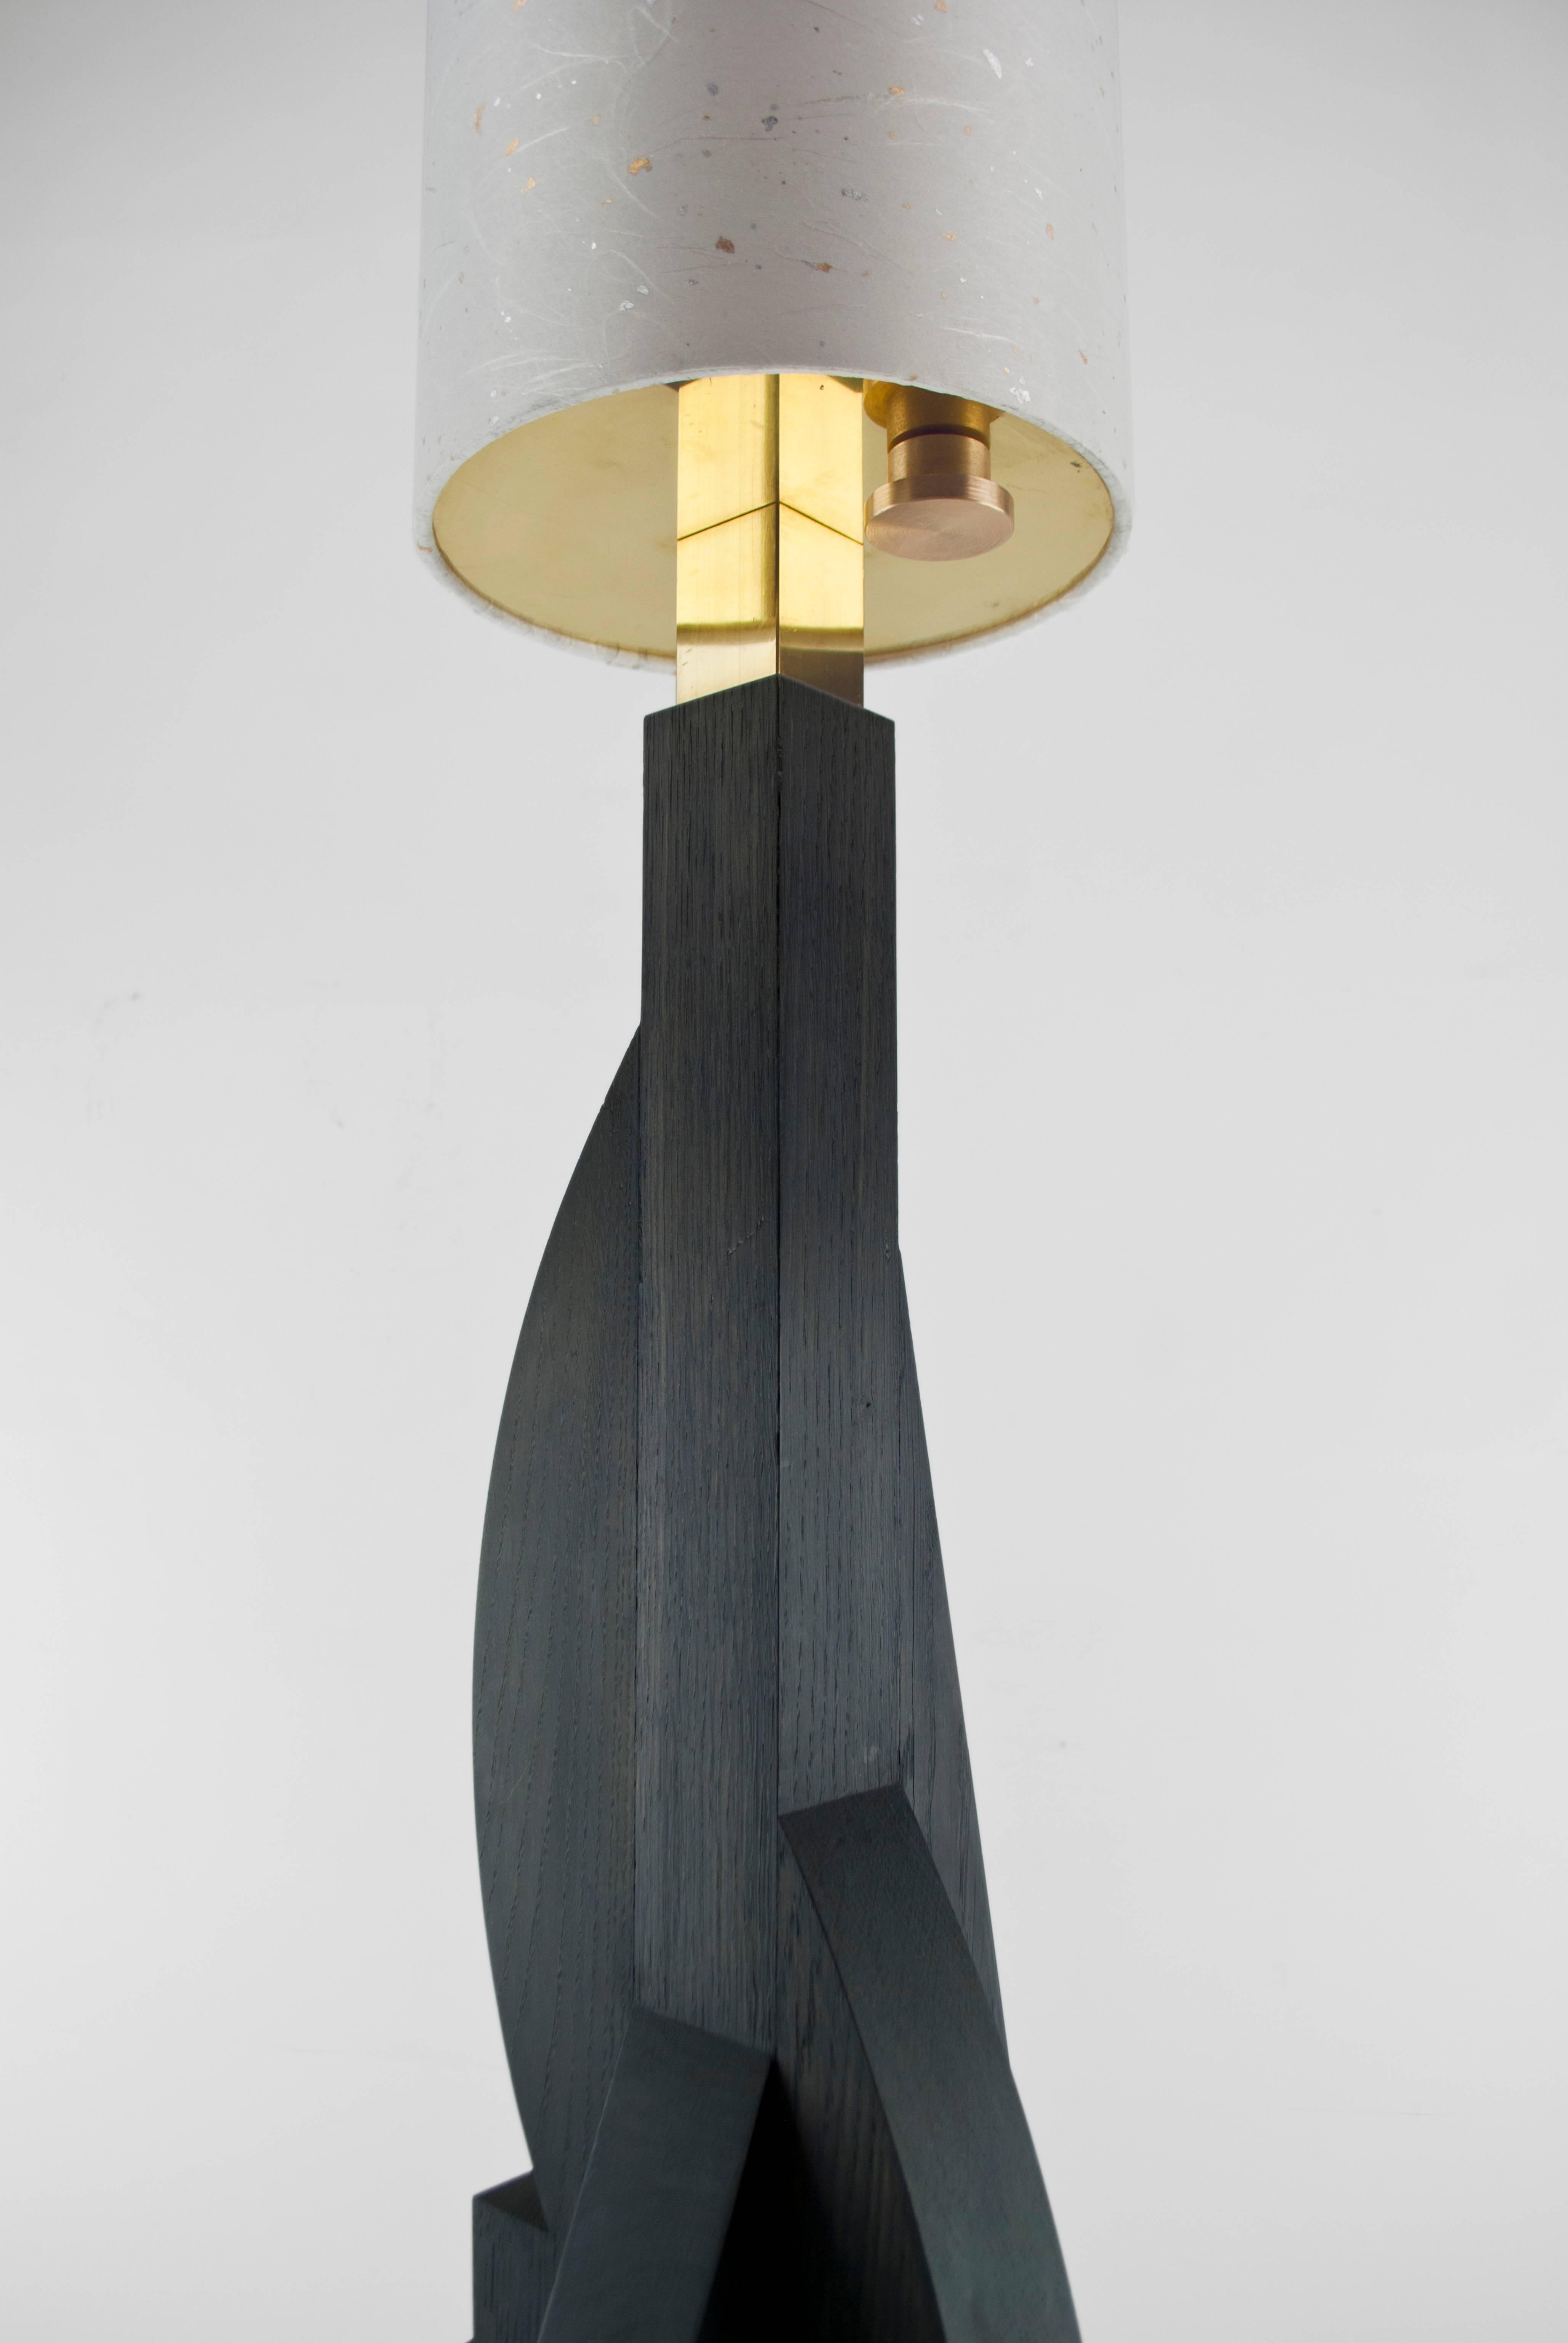 Brass Contemporary Tower Floor Lamp with Geometric Oak Base and Japanese Paper Shade